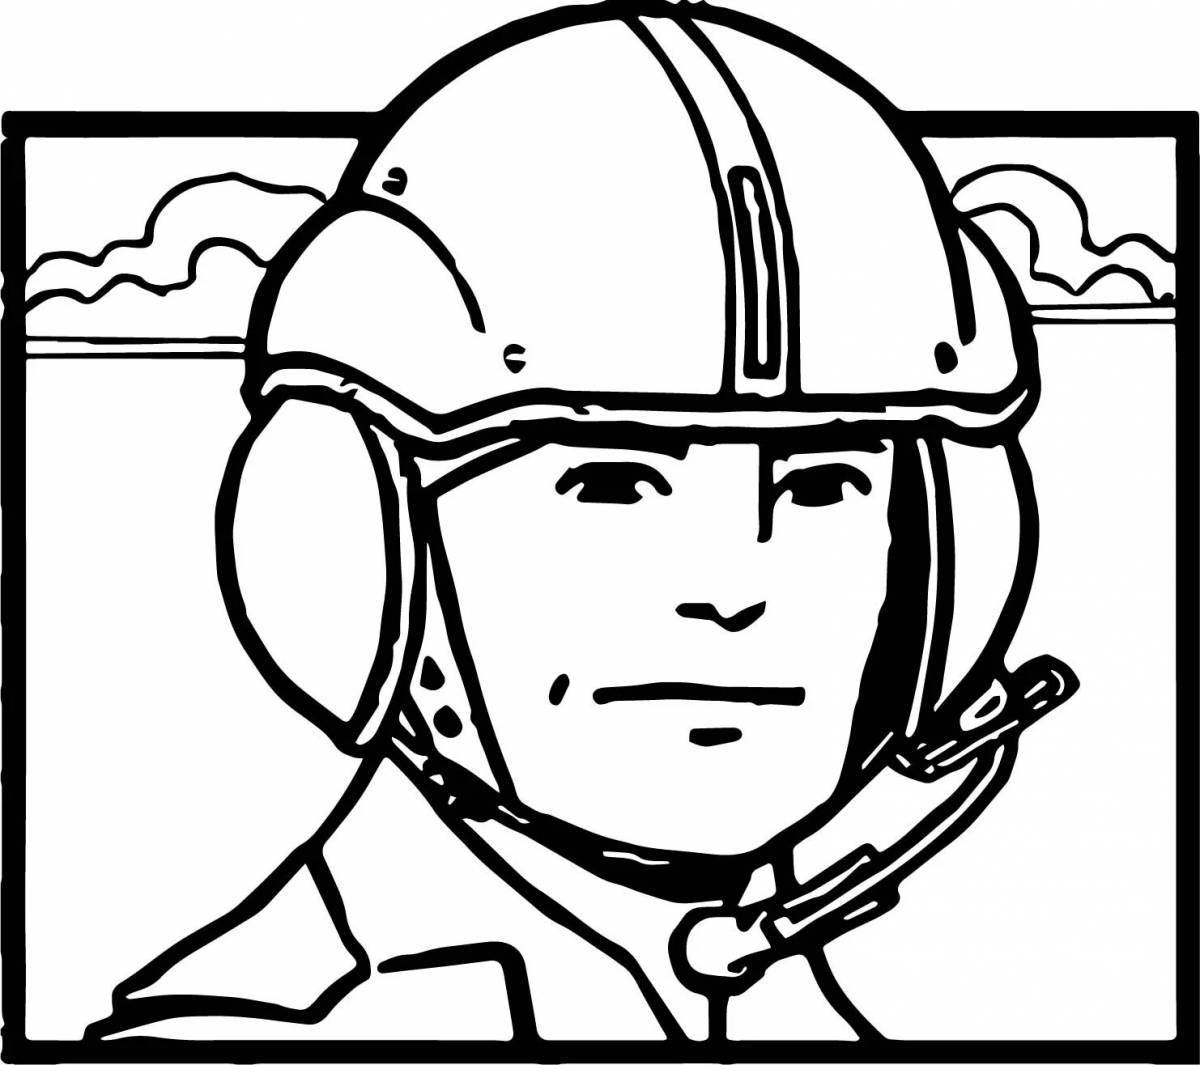 Exciting military helmet coloring page for kids